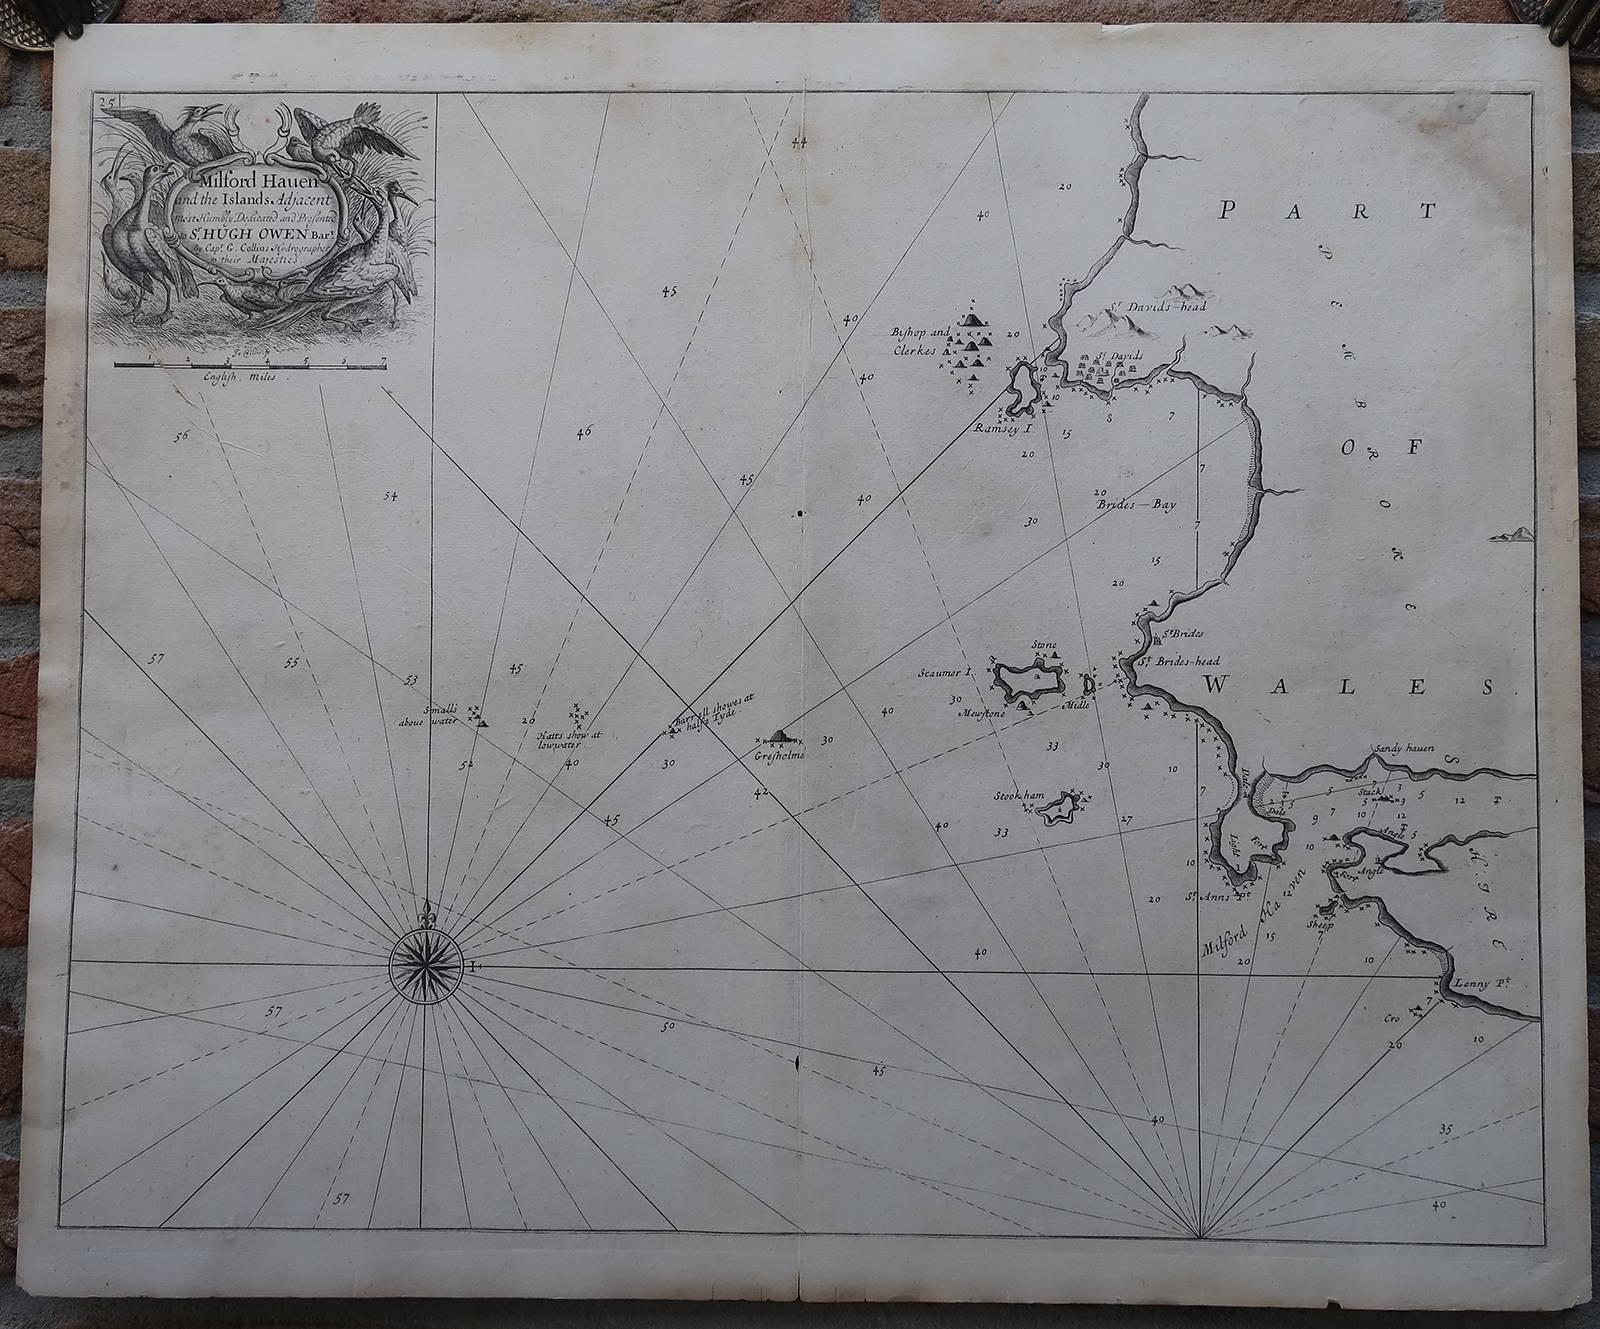 Captain Greenvile Collins Print - Milford Hauen and the Islands Adjacent [...].